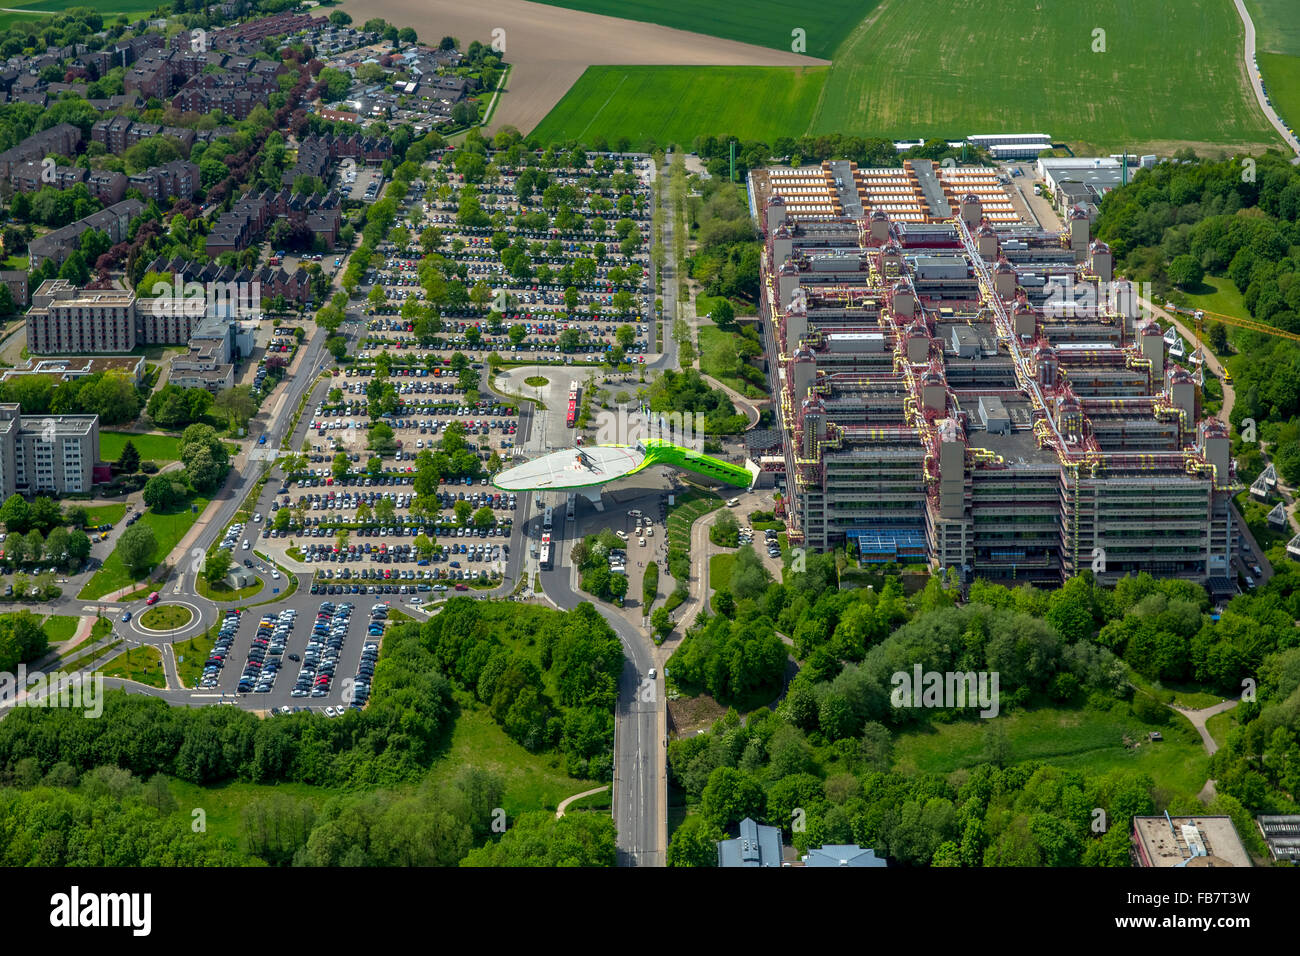 Aerial view, University Hospital RWTH Aachen, University Hospital Aachen with helipad, extravagant helipad with SAR helicopter, Stock Photo